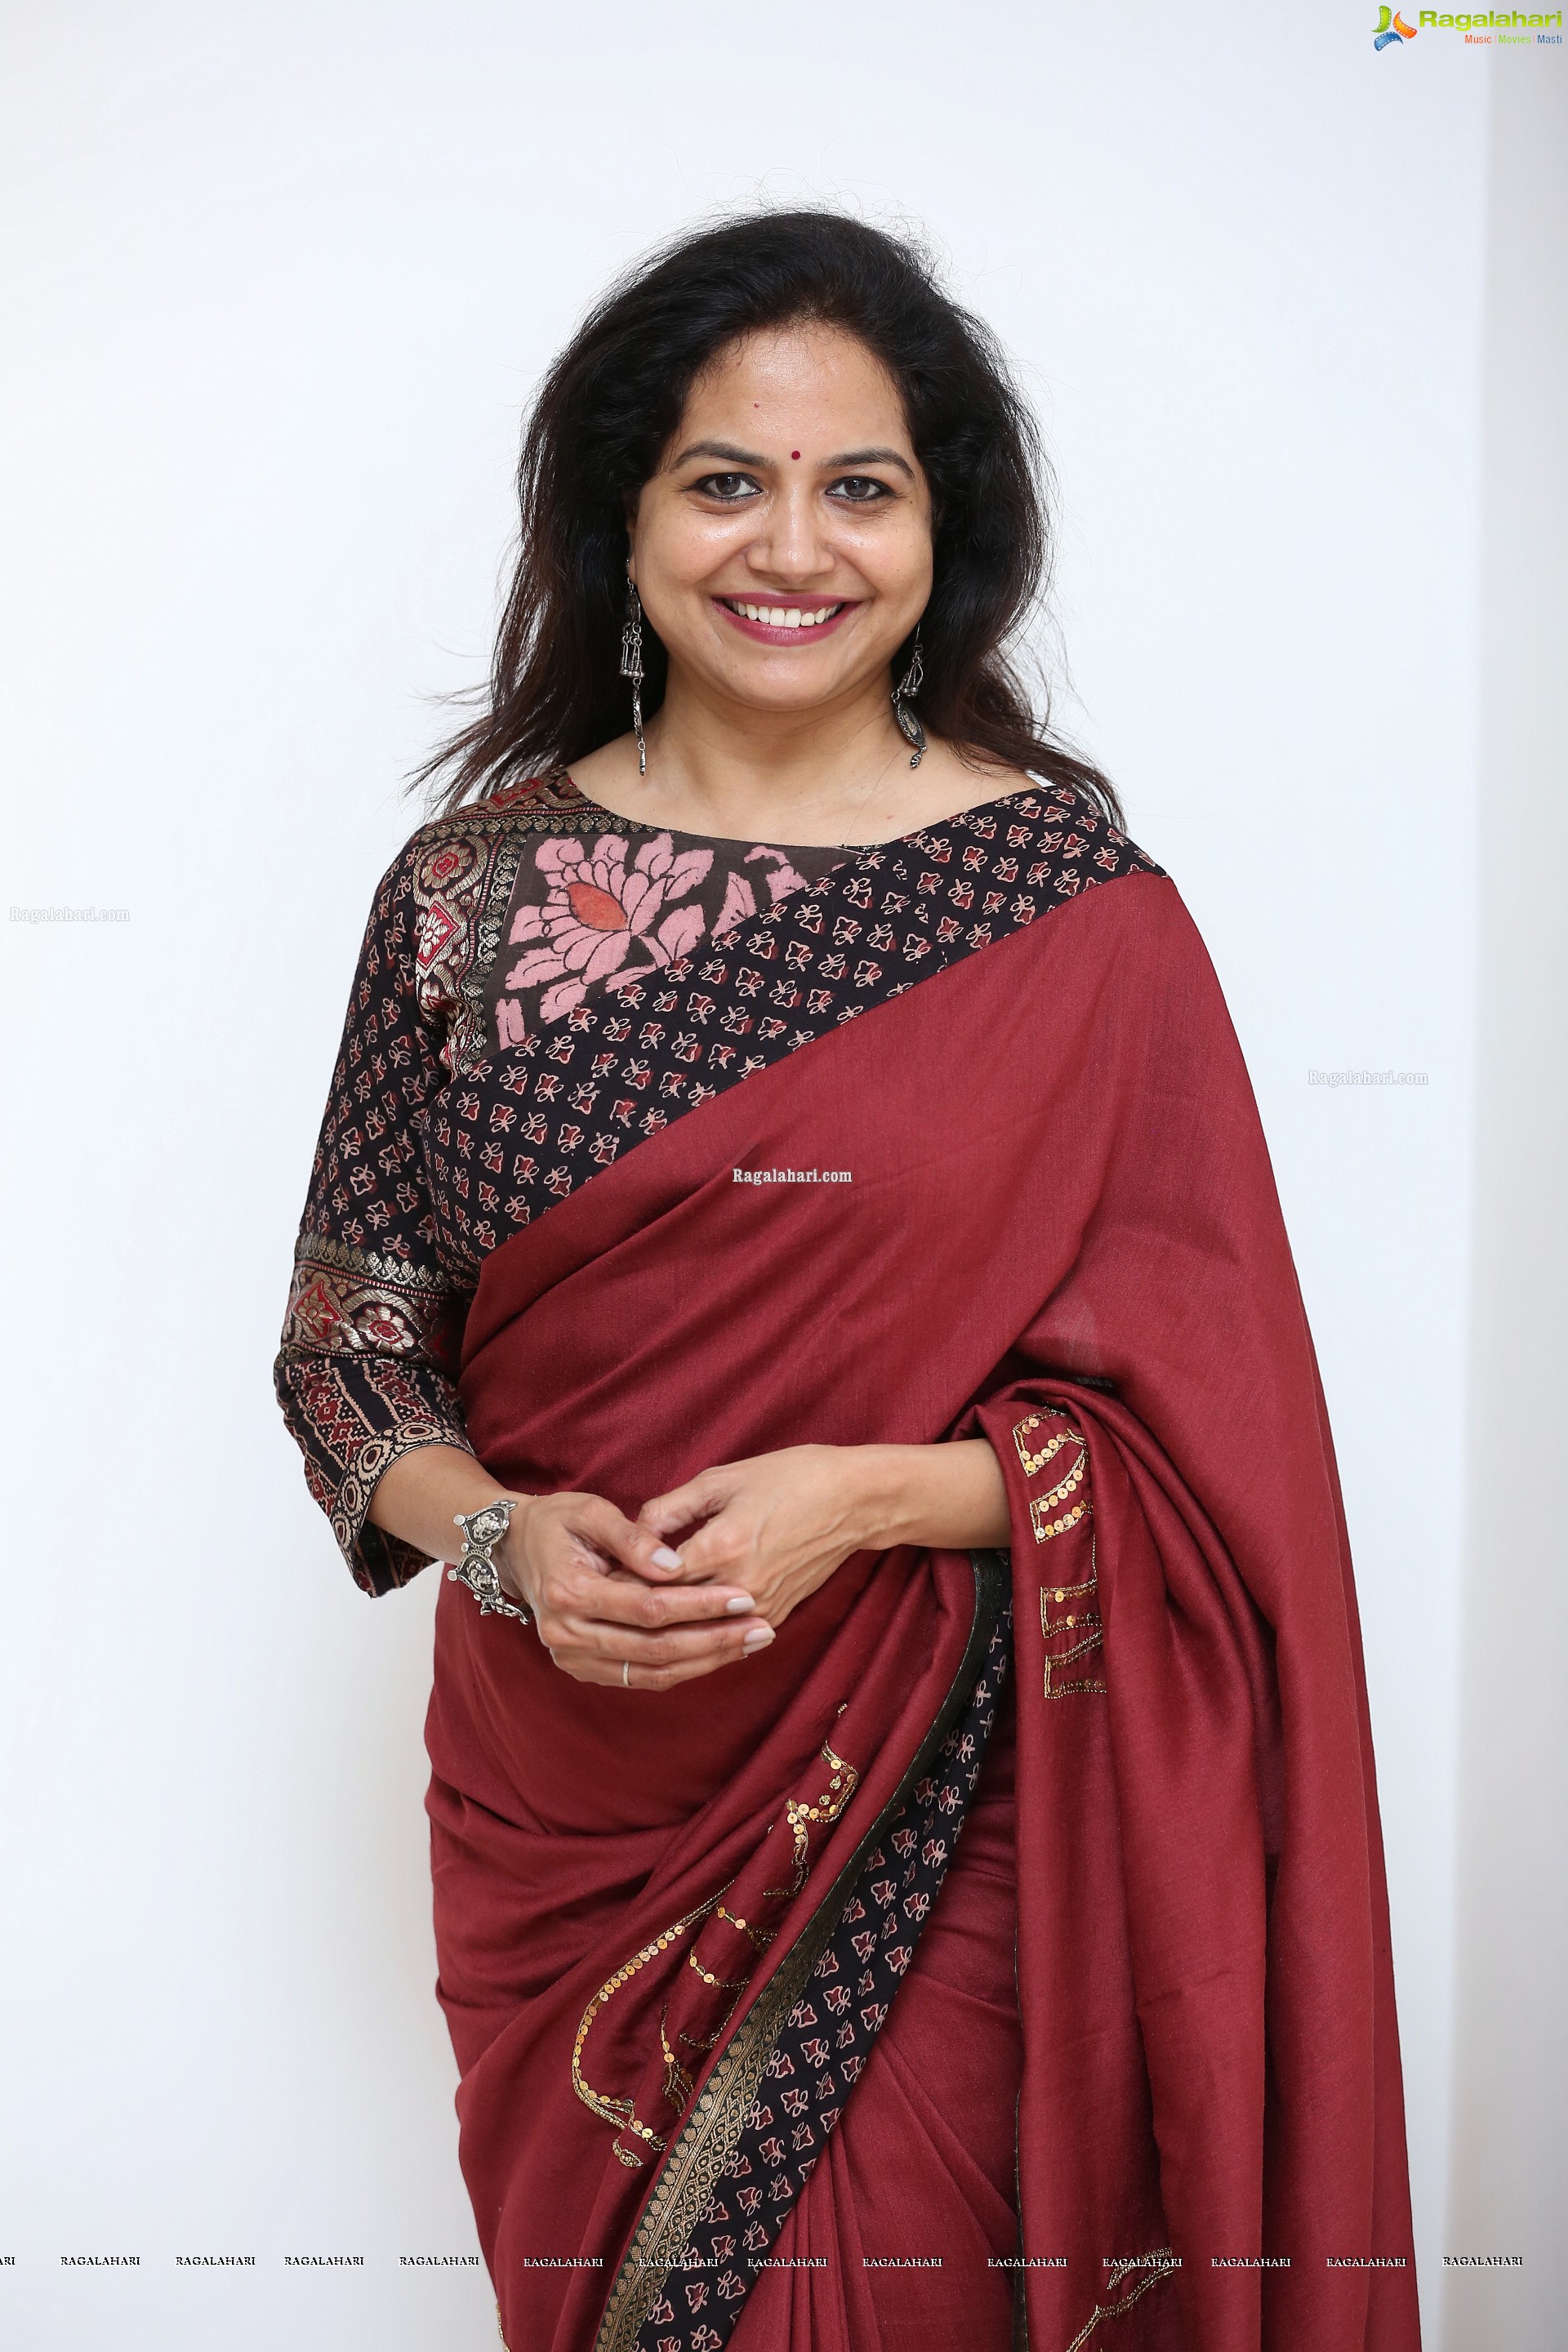 Sunitha at Reminiscences - Kashmir on Canvas Art Exhibition for a Cause - HD Gallery